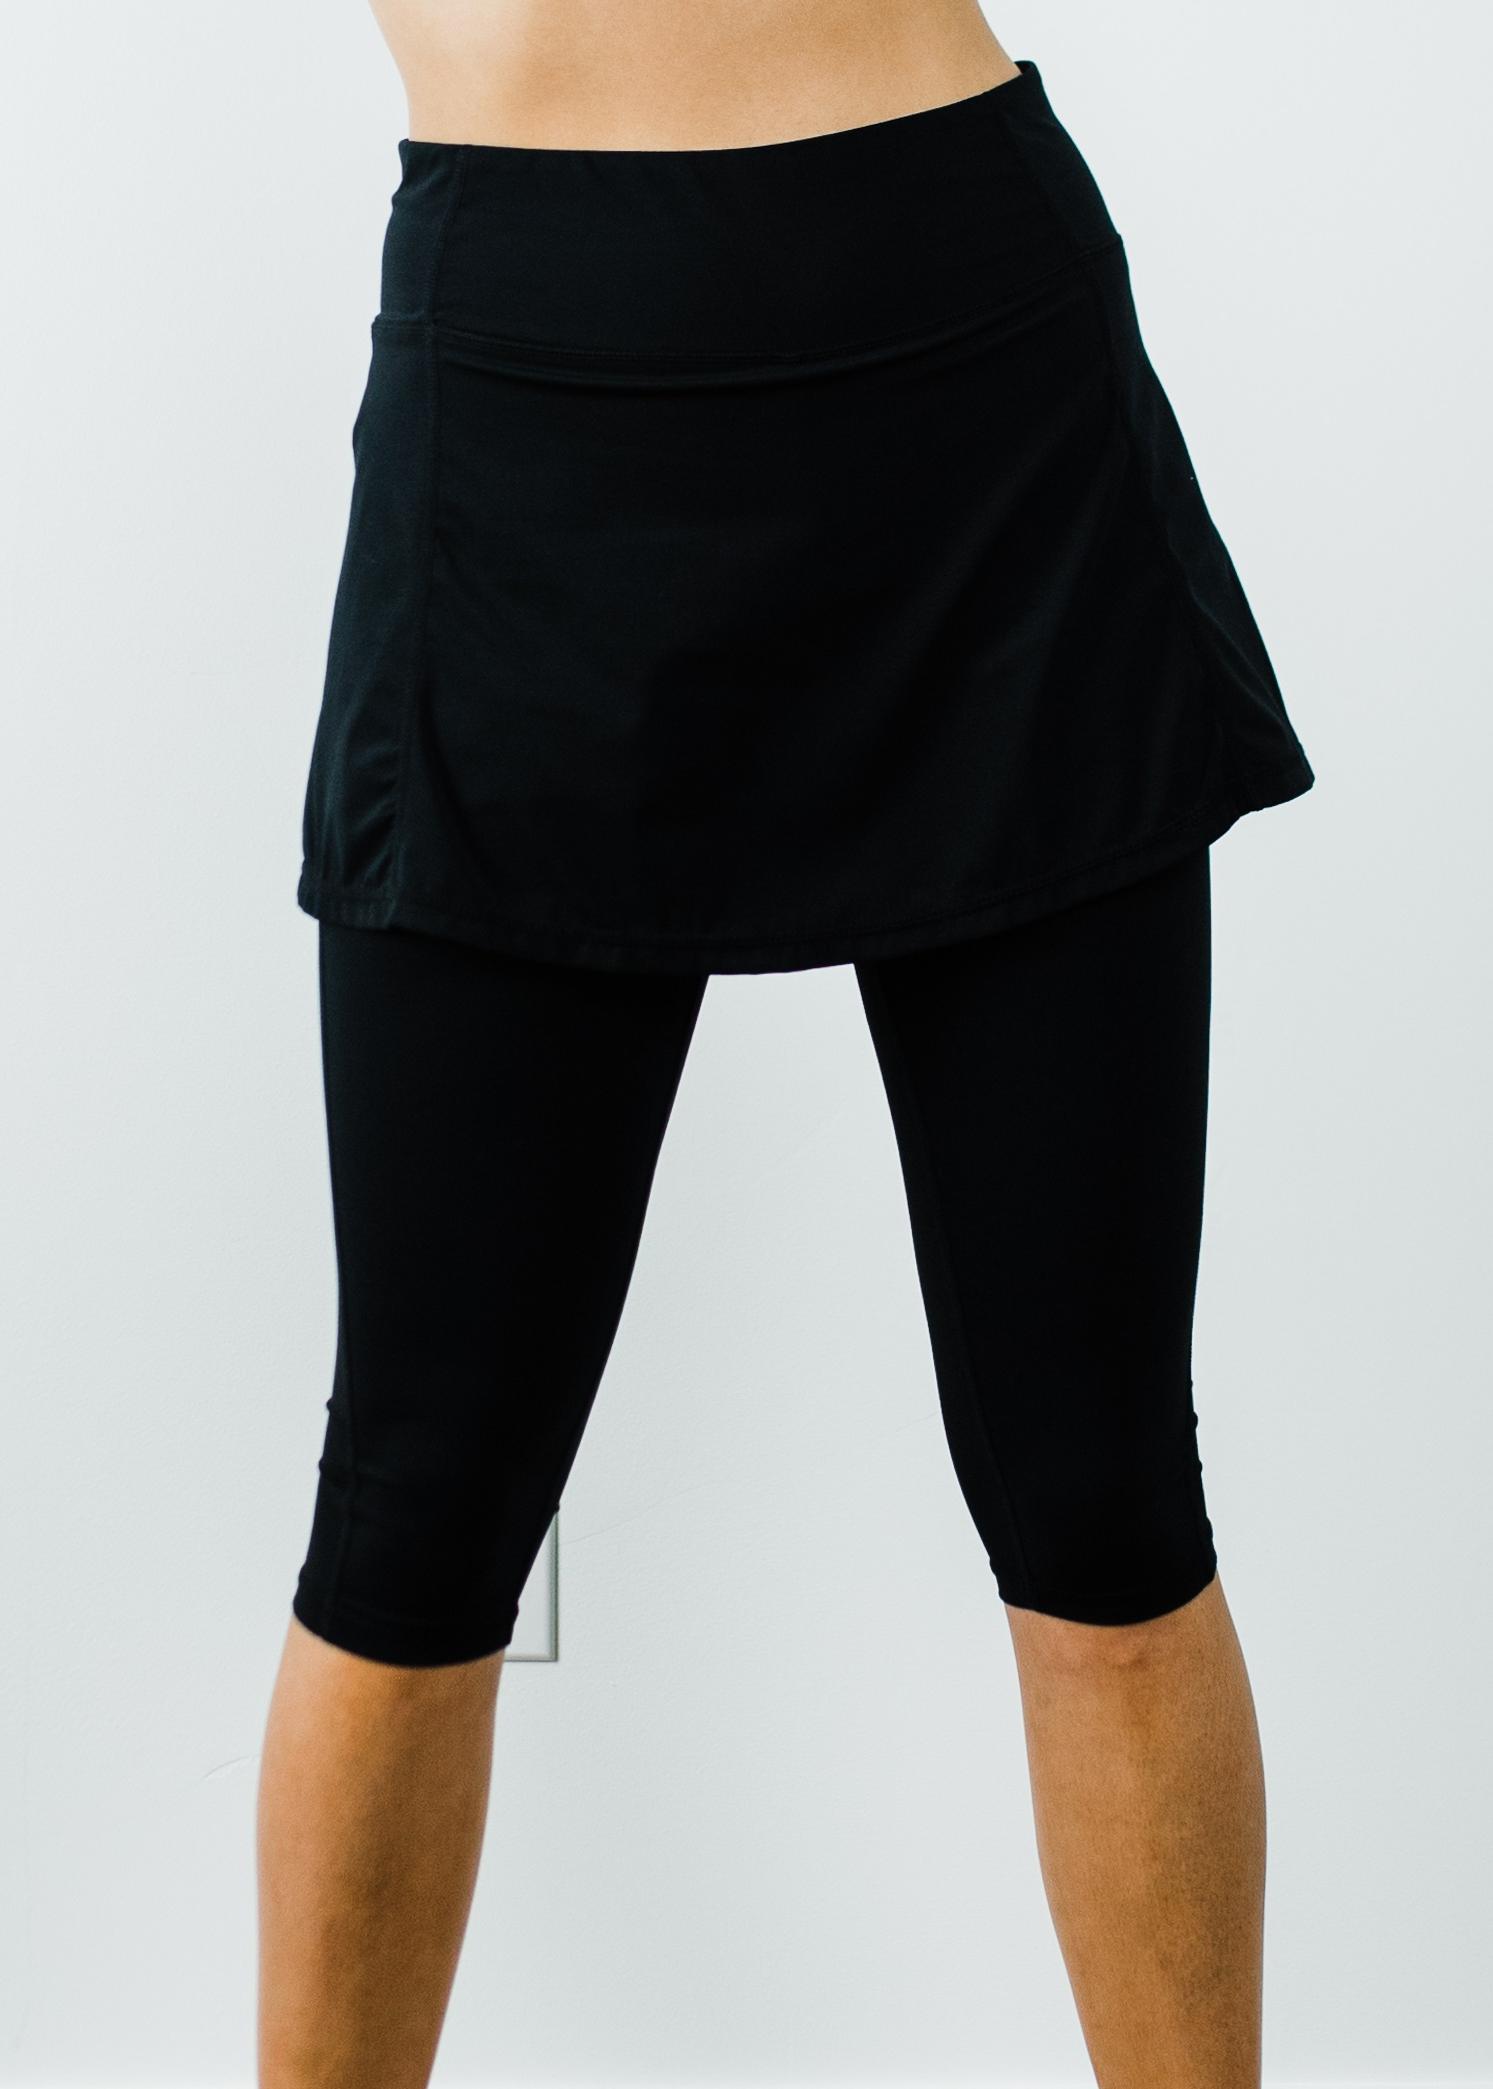 Knee Length Lycra® Sport Skirt with Attached 17 Leggings. Calypsa by ModLi